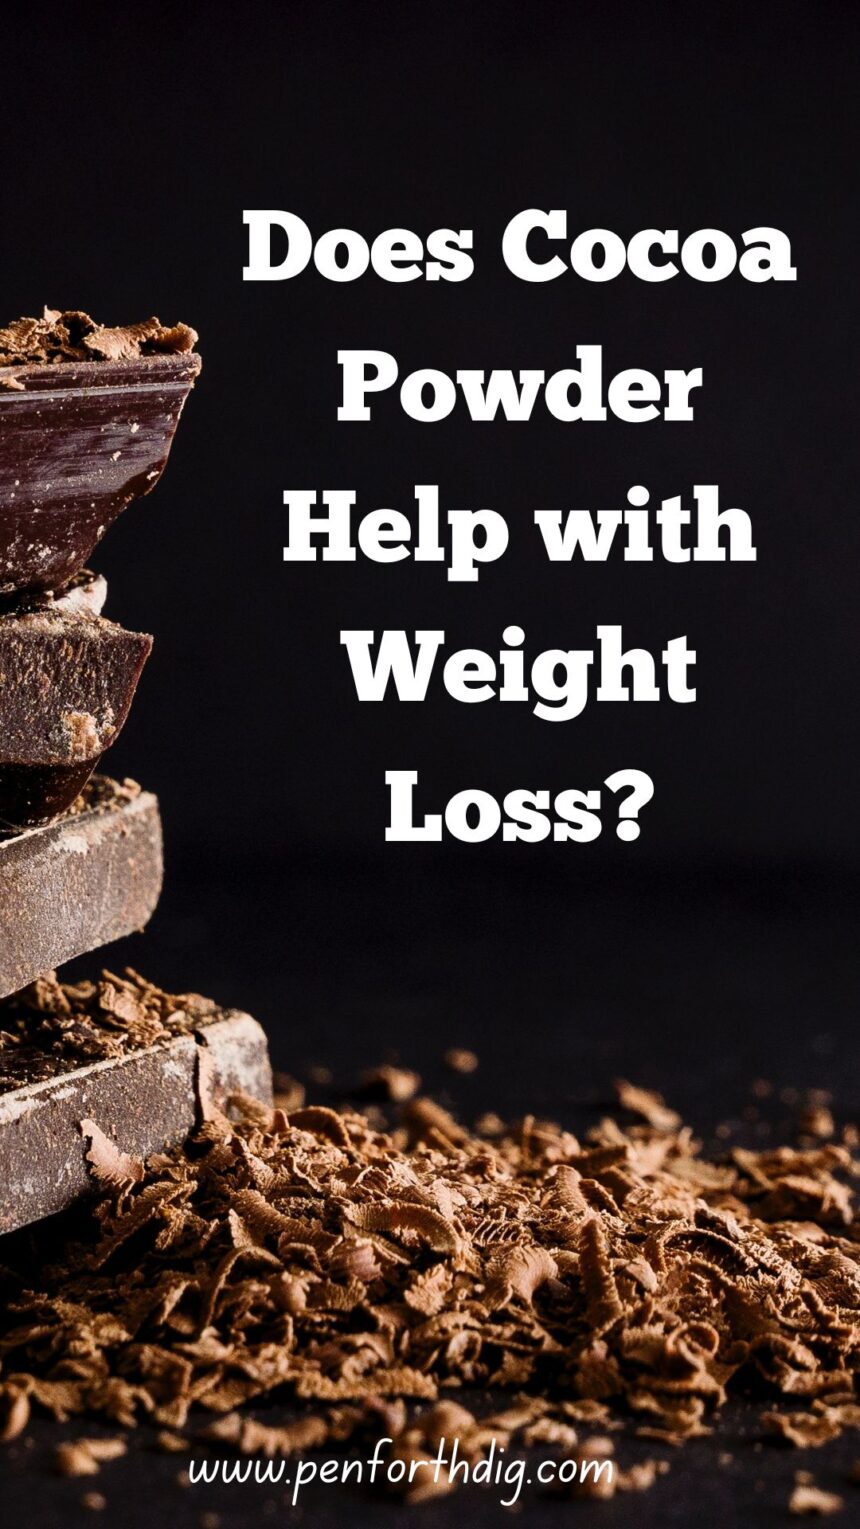 Does Cocoa Powder Help with Weight Loss